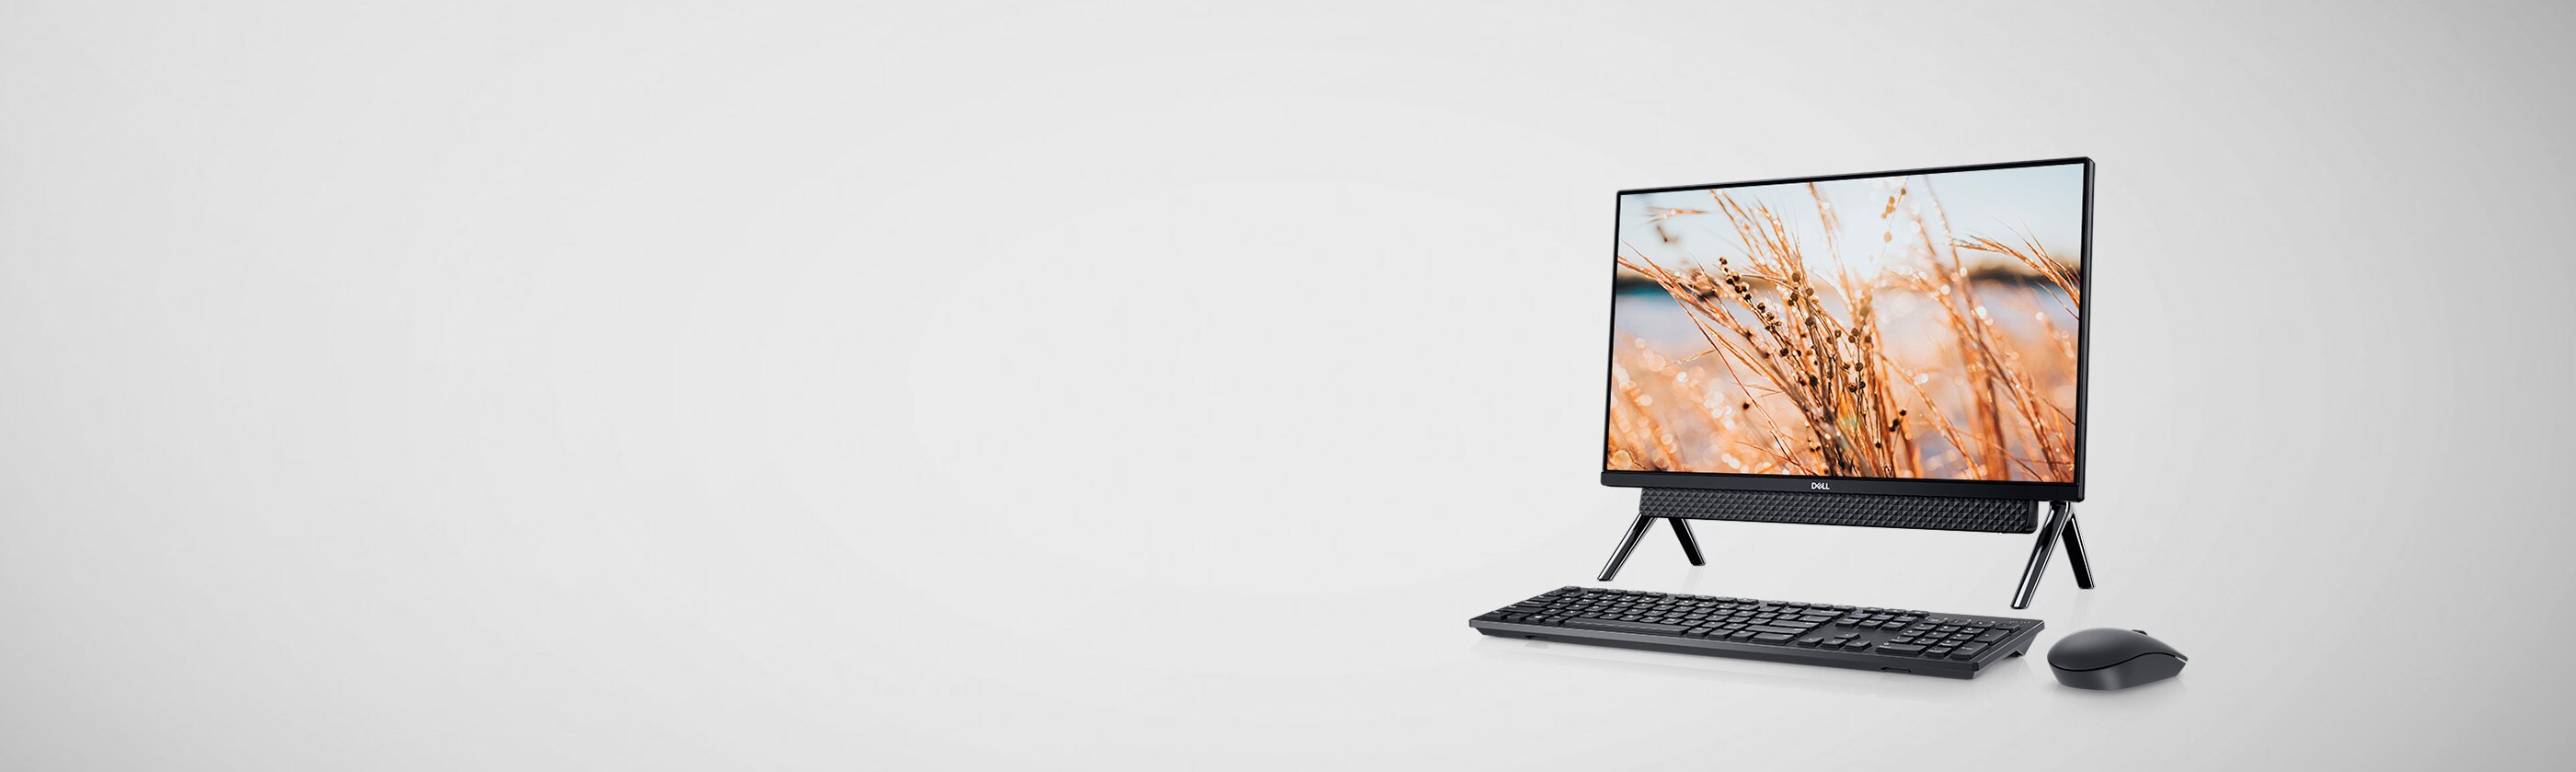 Best All-in-One Computers & All in One PCs | Dell India